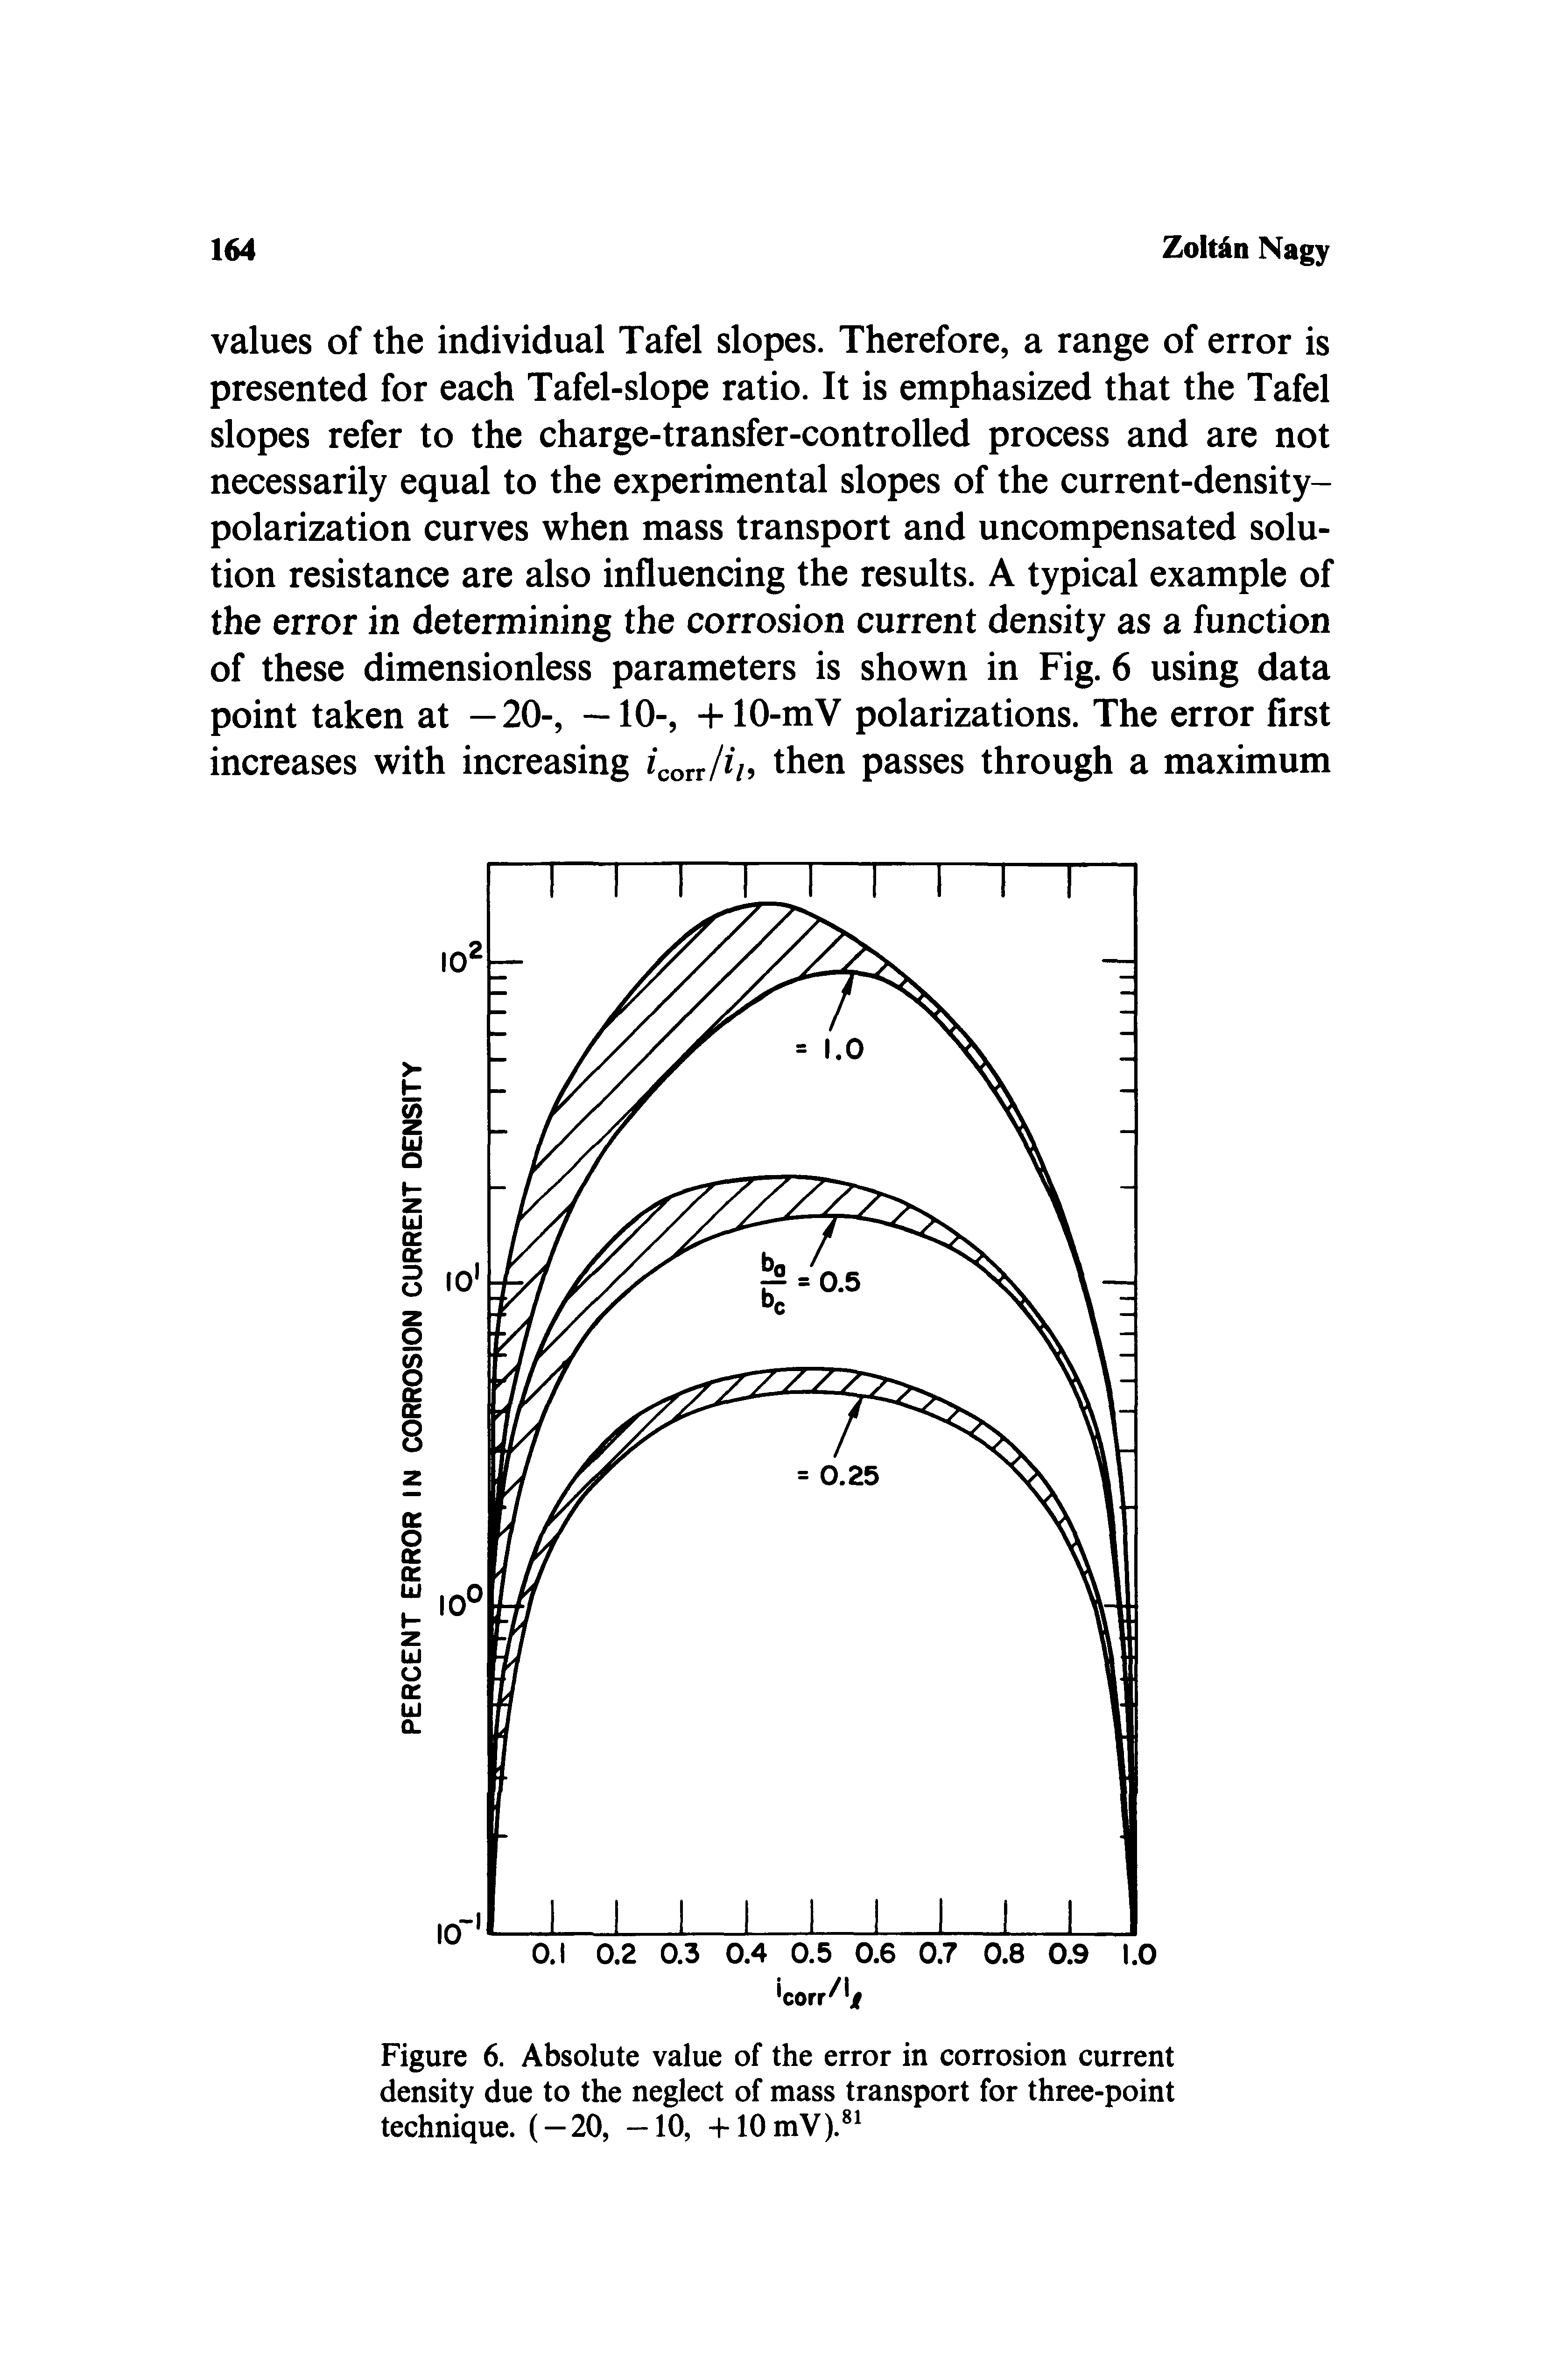 Figure 6. Absolute value of the error in corrosion current density due to the neglect of mass transport for three-point technique. ( — 20, —10, +10mV). ...